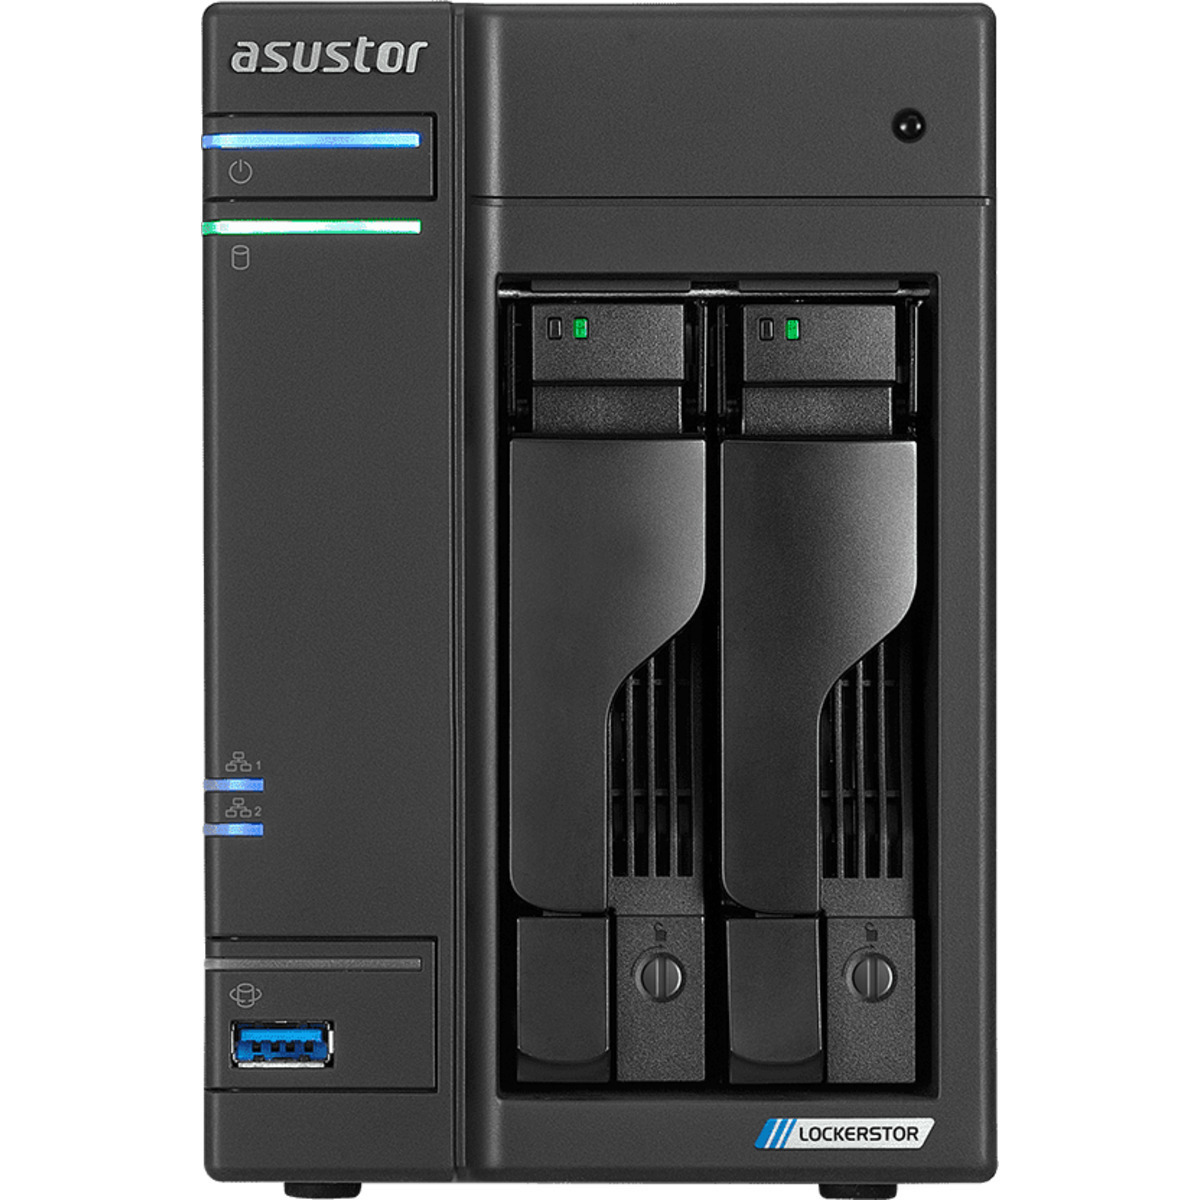 ASUSTOR AS6602T Lockerstor 2 1tb 2-Bay Desktop Multimedia / Power User / Business NAS - Network Attached Storage Device 1x1tb Western Digital Red SA500 WDS100T1R0A 2.5 560/530MB/s SATA 6Gb/s SSD NAS Class Drives Installed - Burn-In Tested - FREE RAM UPGRADE AS6602T Lockerstor 2